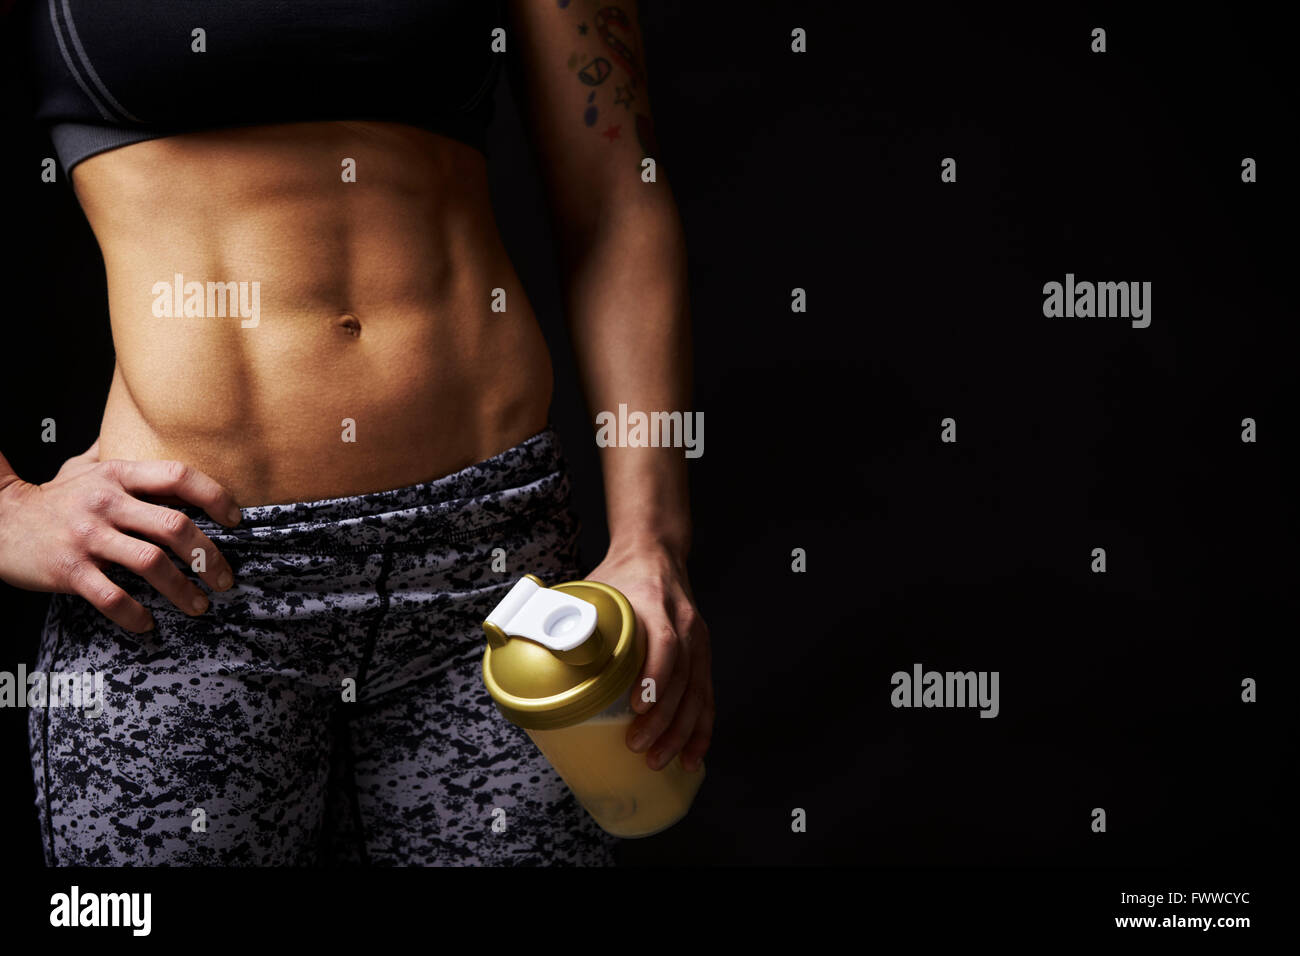 Mid-section crop of muscular young woman holding drink cup Stock Photo